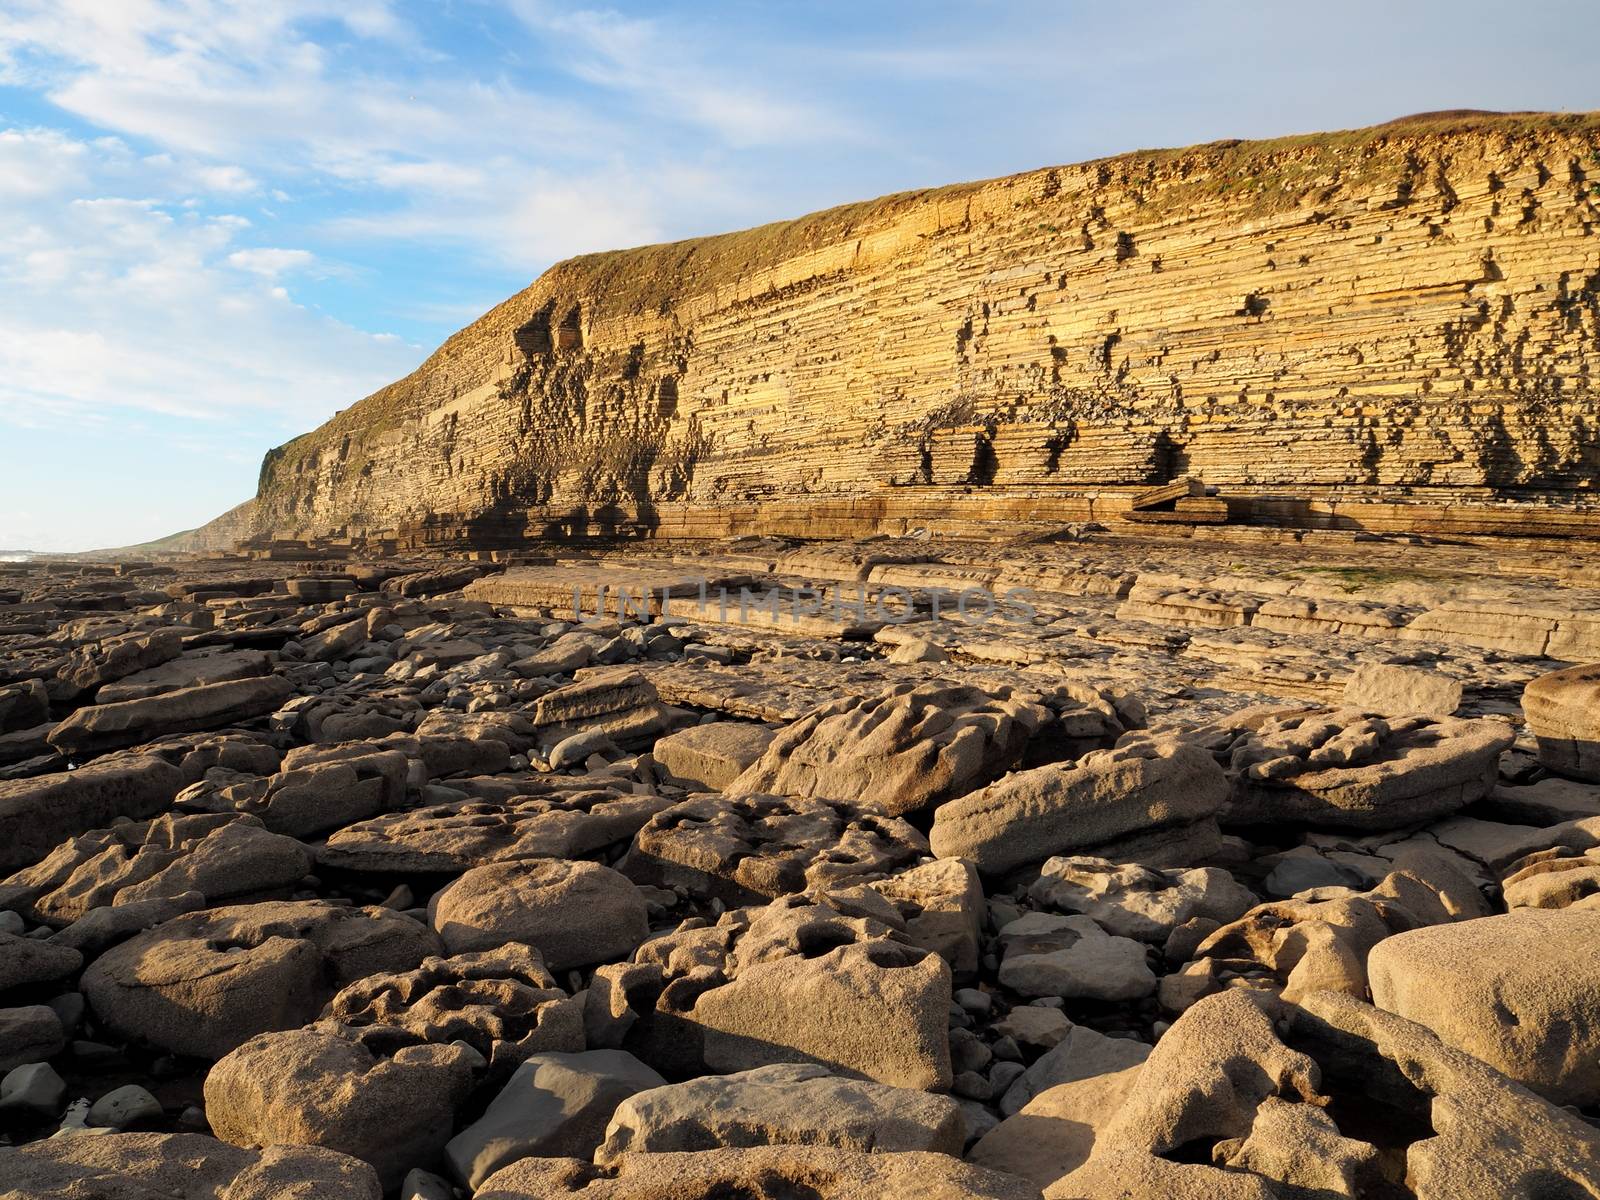 Carboniferous limestone cliffs at Dunraven Bay, Vale of Glamorgan, South Wales by PhilHarland